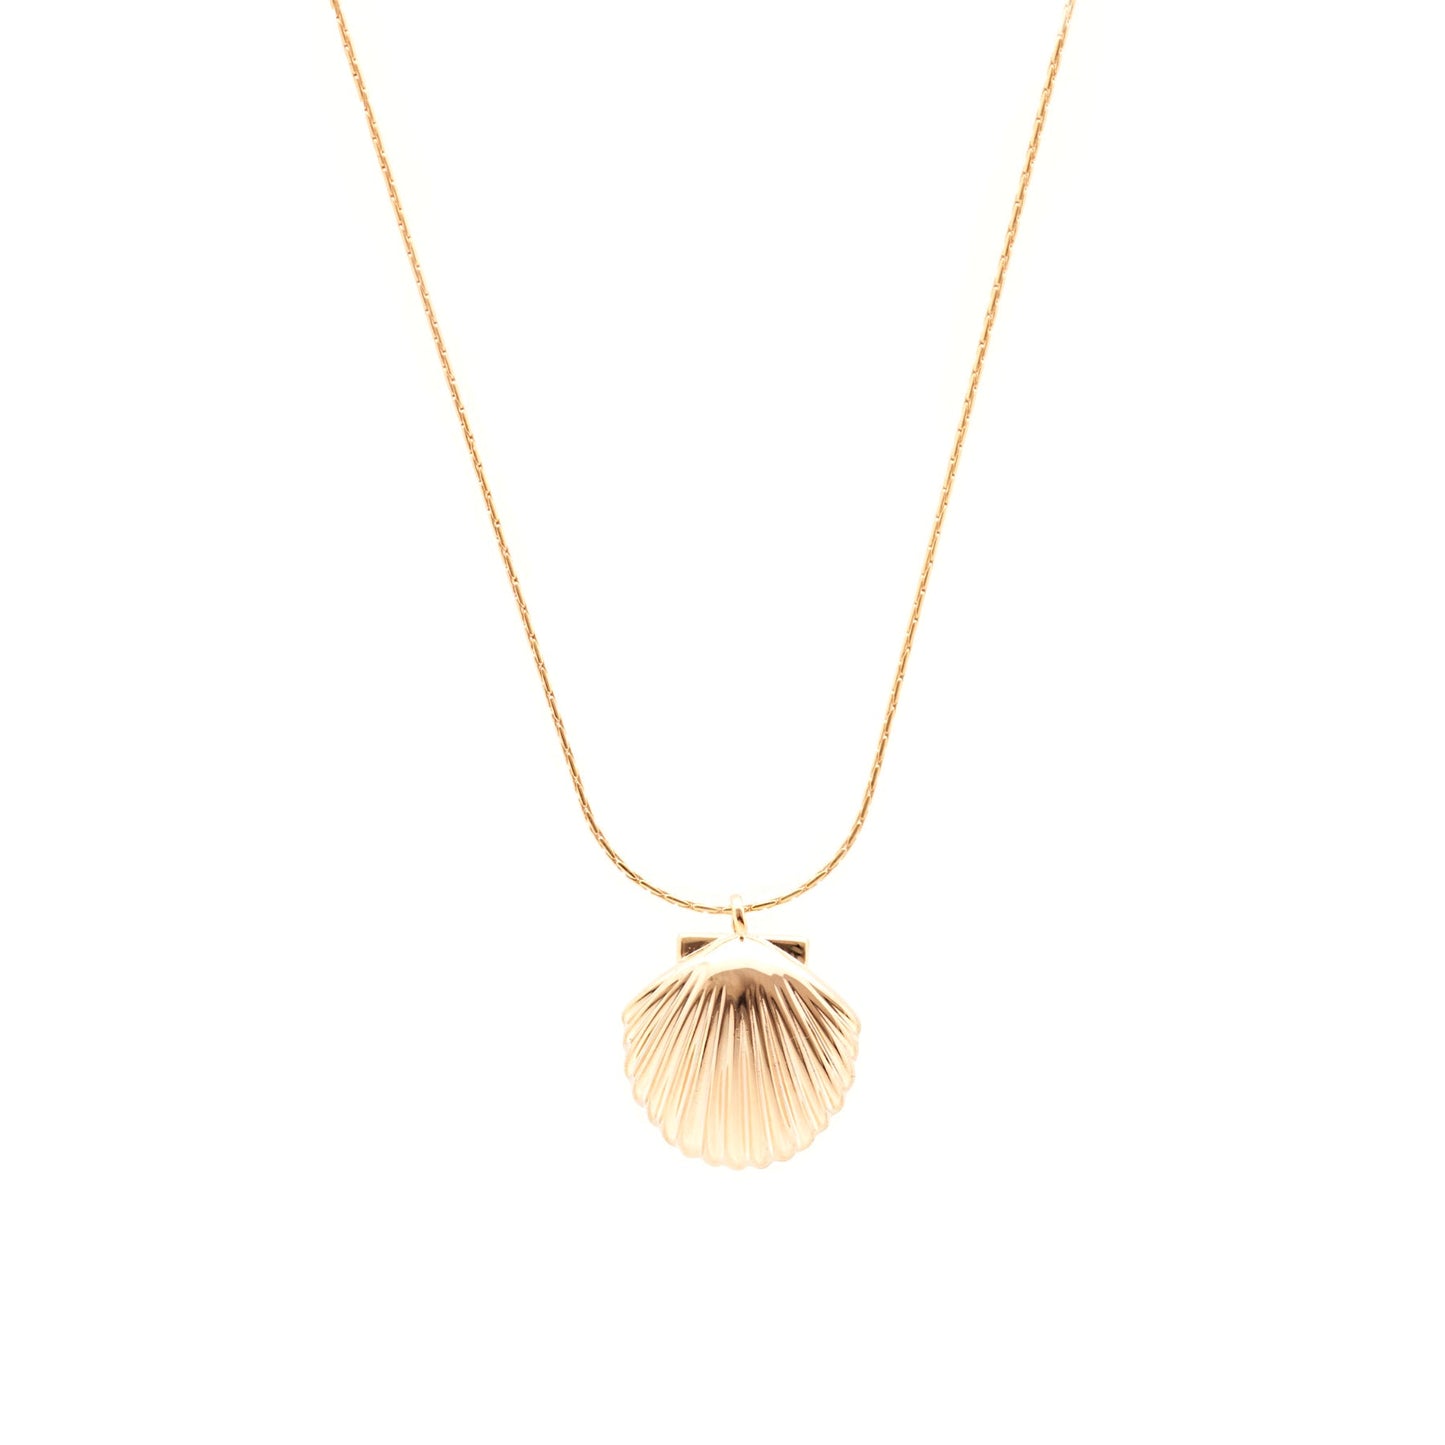 Salty Cali Beachy Necklace - Gold